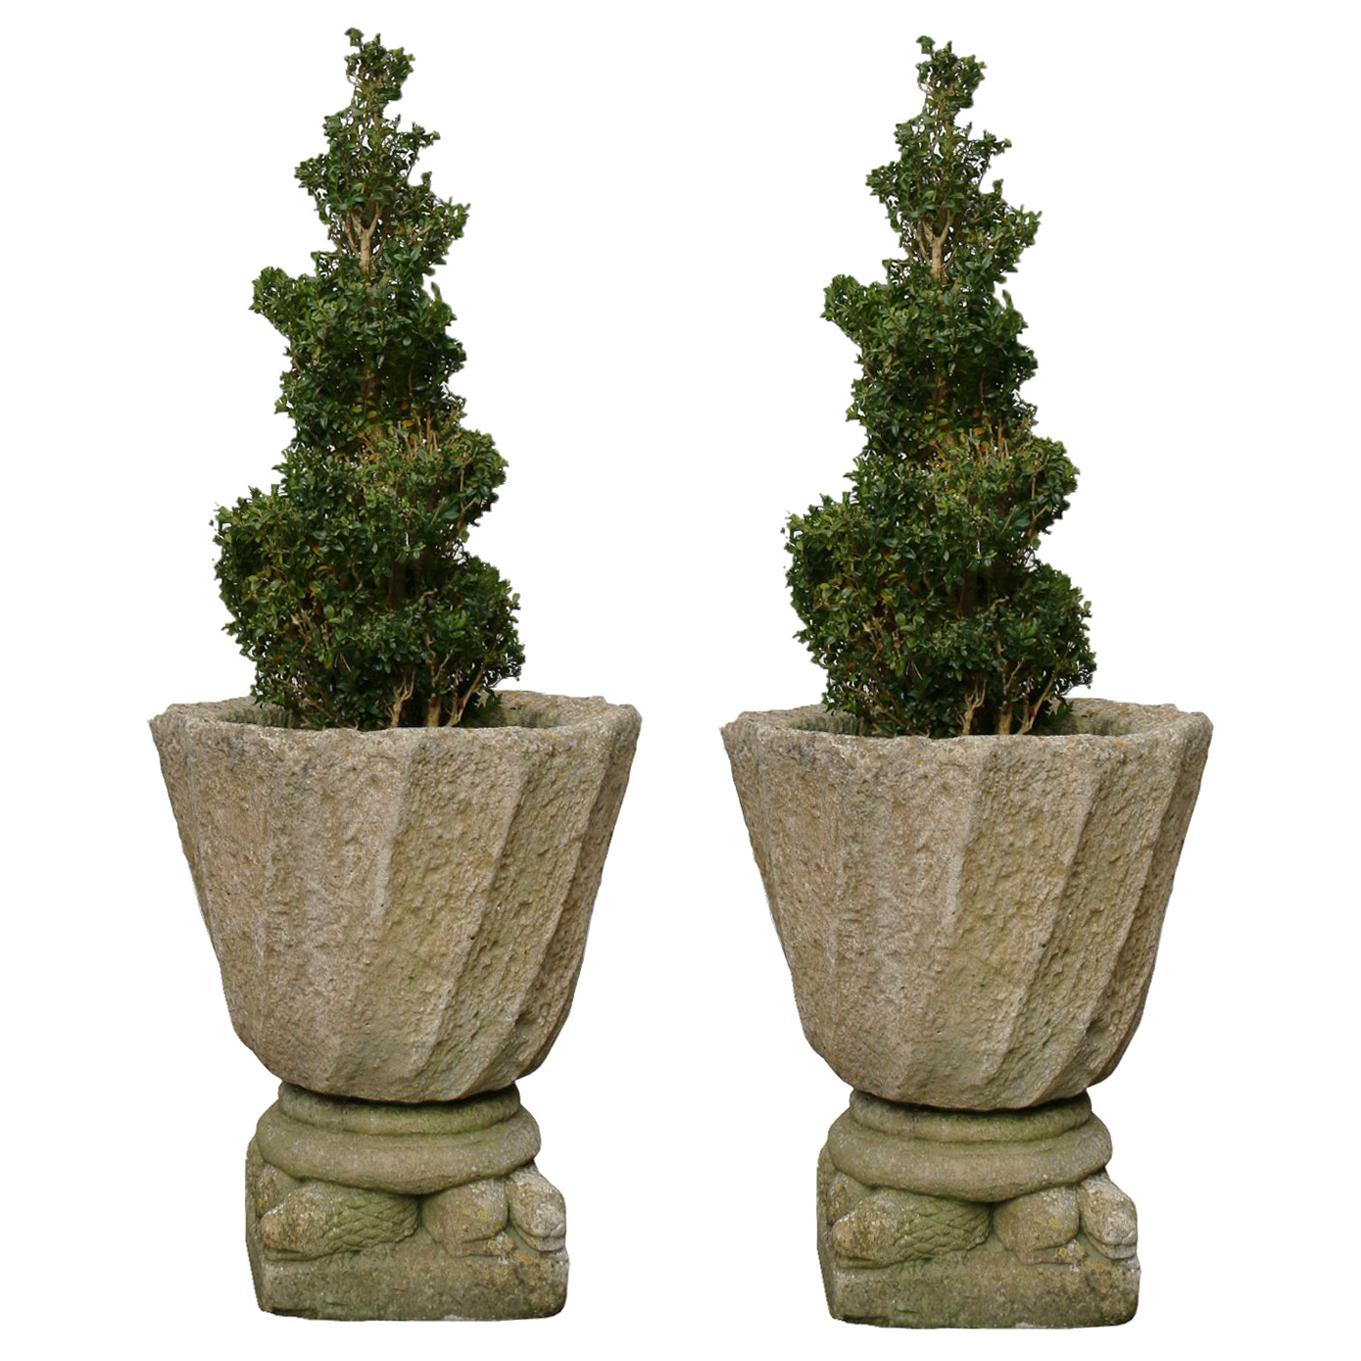 Pair Of Stone Garden Urns or Planters